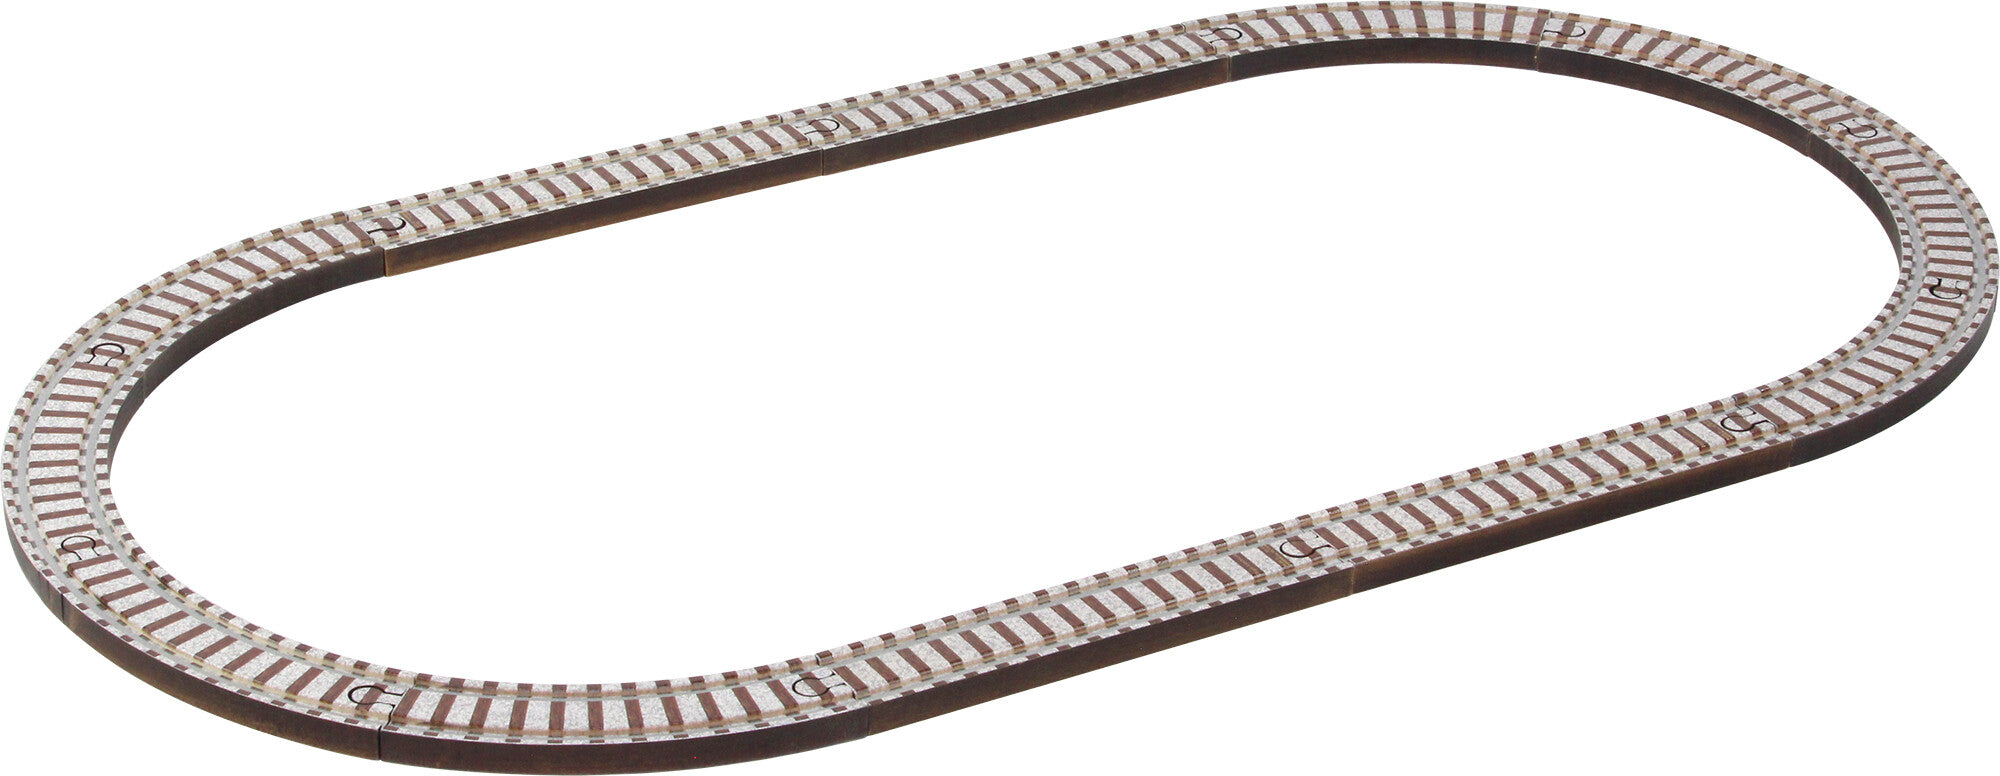 Wooden Train Track, Oval Set